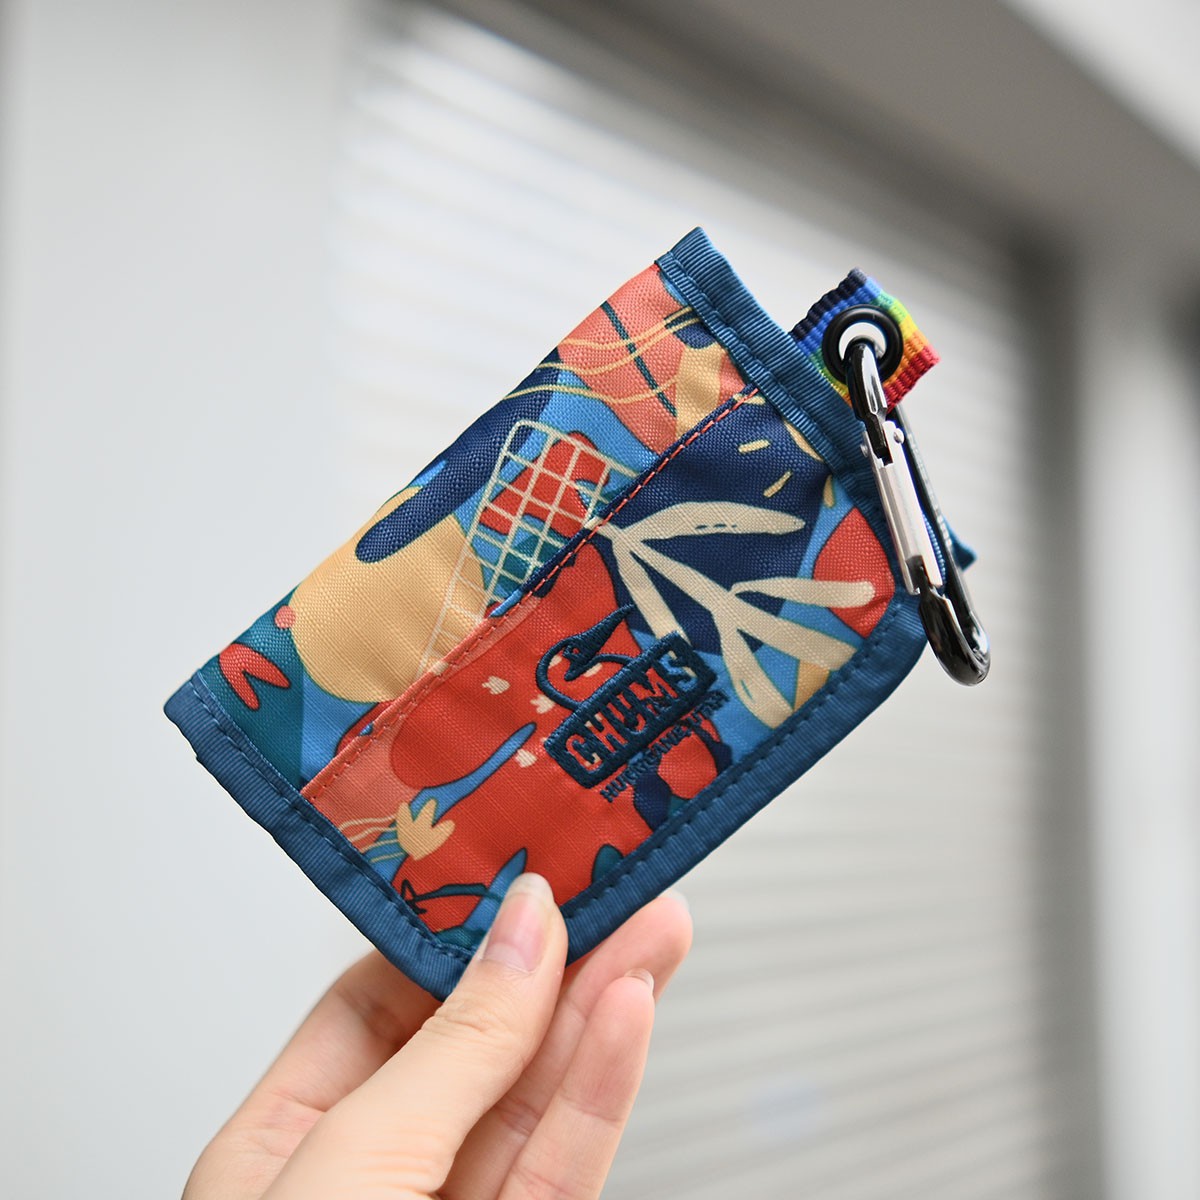 Chums Spring Dale Trifold Wallet 3褶銀包 Z208 Abstract Nature (不包含行山型扣具)